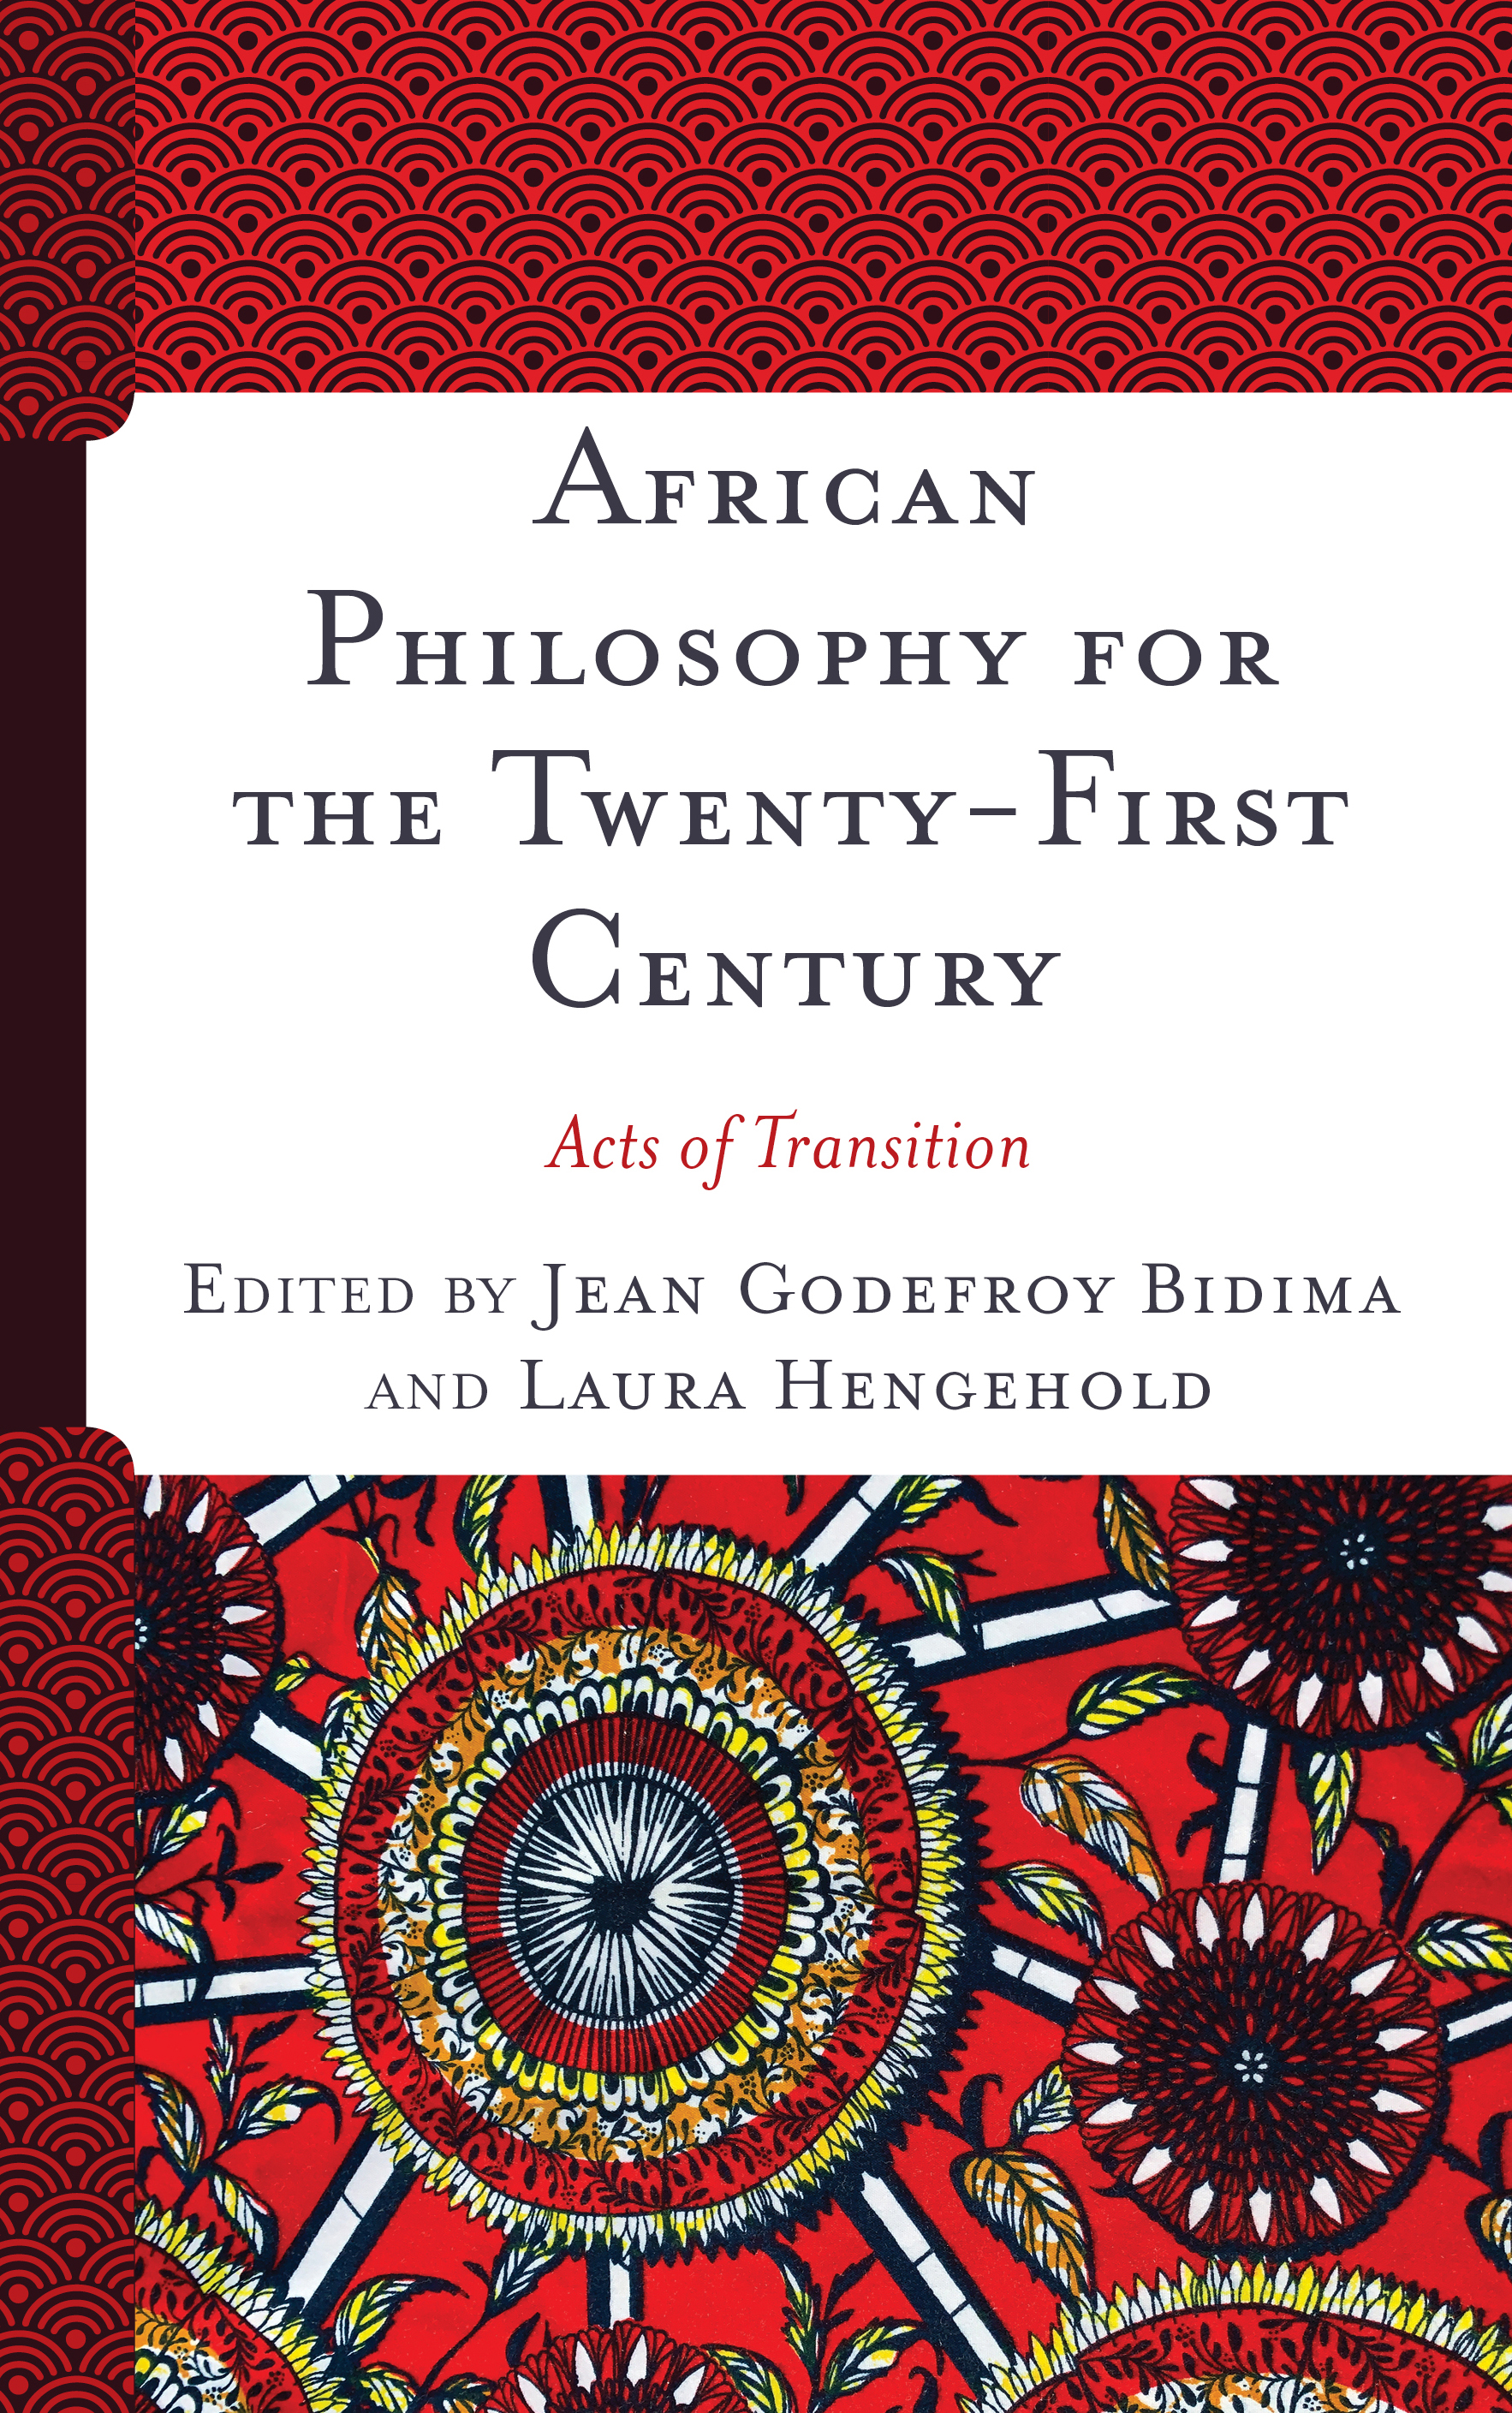 African Philosophy for the Twenty-First Century: Acts of Transition